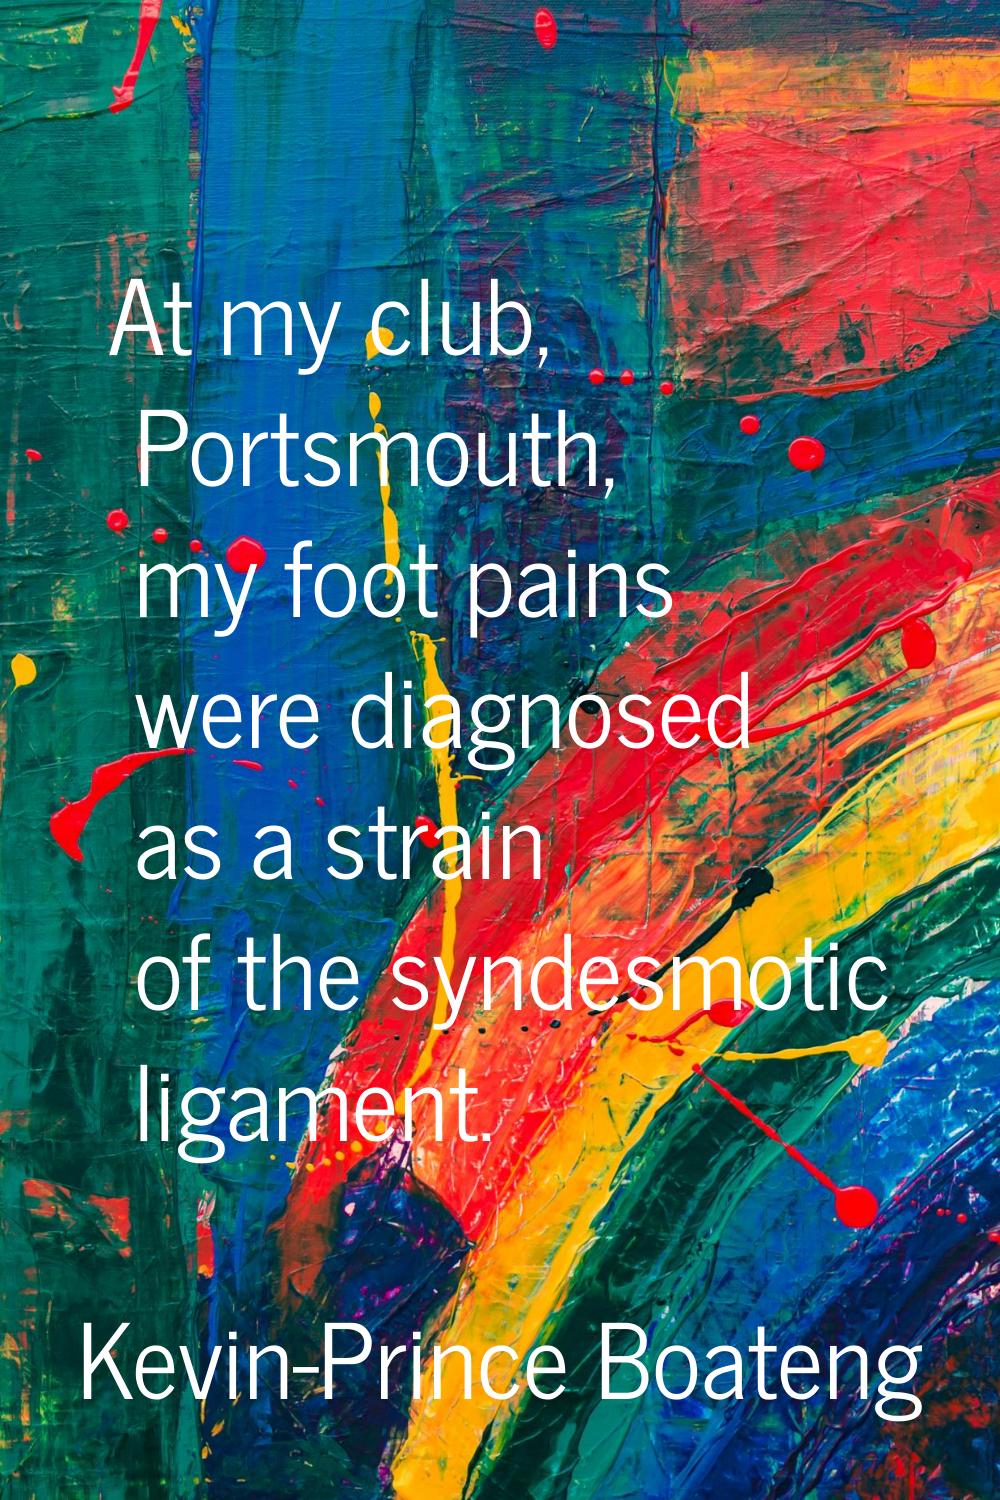 At my club, Portsmouth, my foot pains were diagnosed as a strain of the syndesmotic ligament.